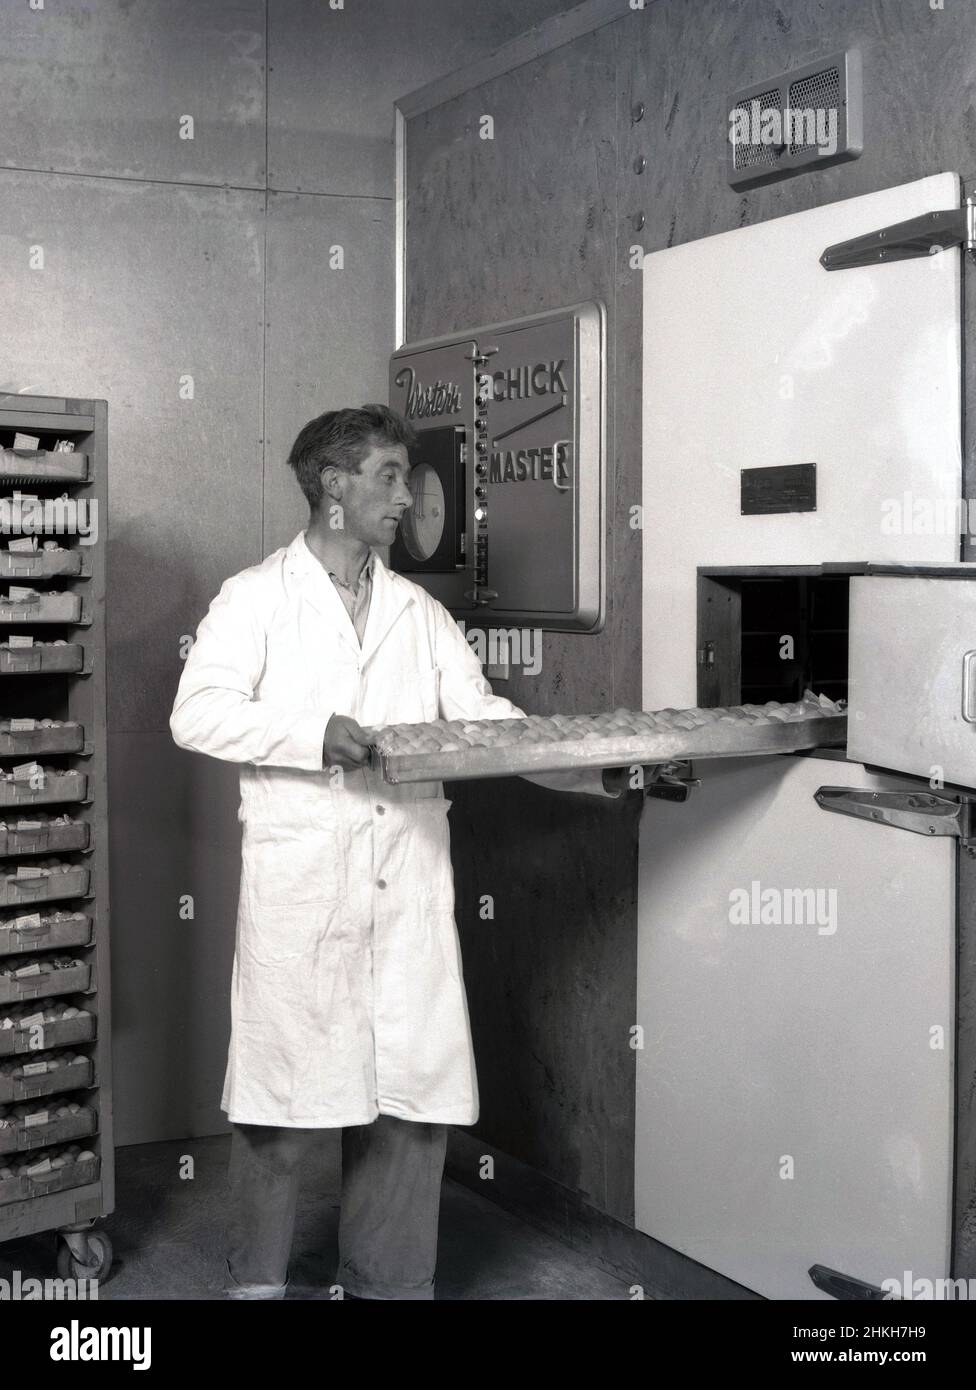 1950s, historical, a male worker in a white coat putting a tray of eggs into an incubator, a Western Chick Master, England, UK. artificial incubation for hatching eggs began in the 1920s, when the first electrically heated and regulated mammoth incubator was invented. The need was to combine a fan and heater to regulate temperature and humidity. Chick Master was founded in 1948 in Cleveland, Ohio, USA. The 1950s saw poultry become a food that more people chose to eat and saw the start of of the British broiler industry, chickens raised for their meat, as opposed to ones which lay eggs. Stock Photo